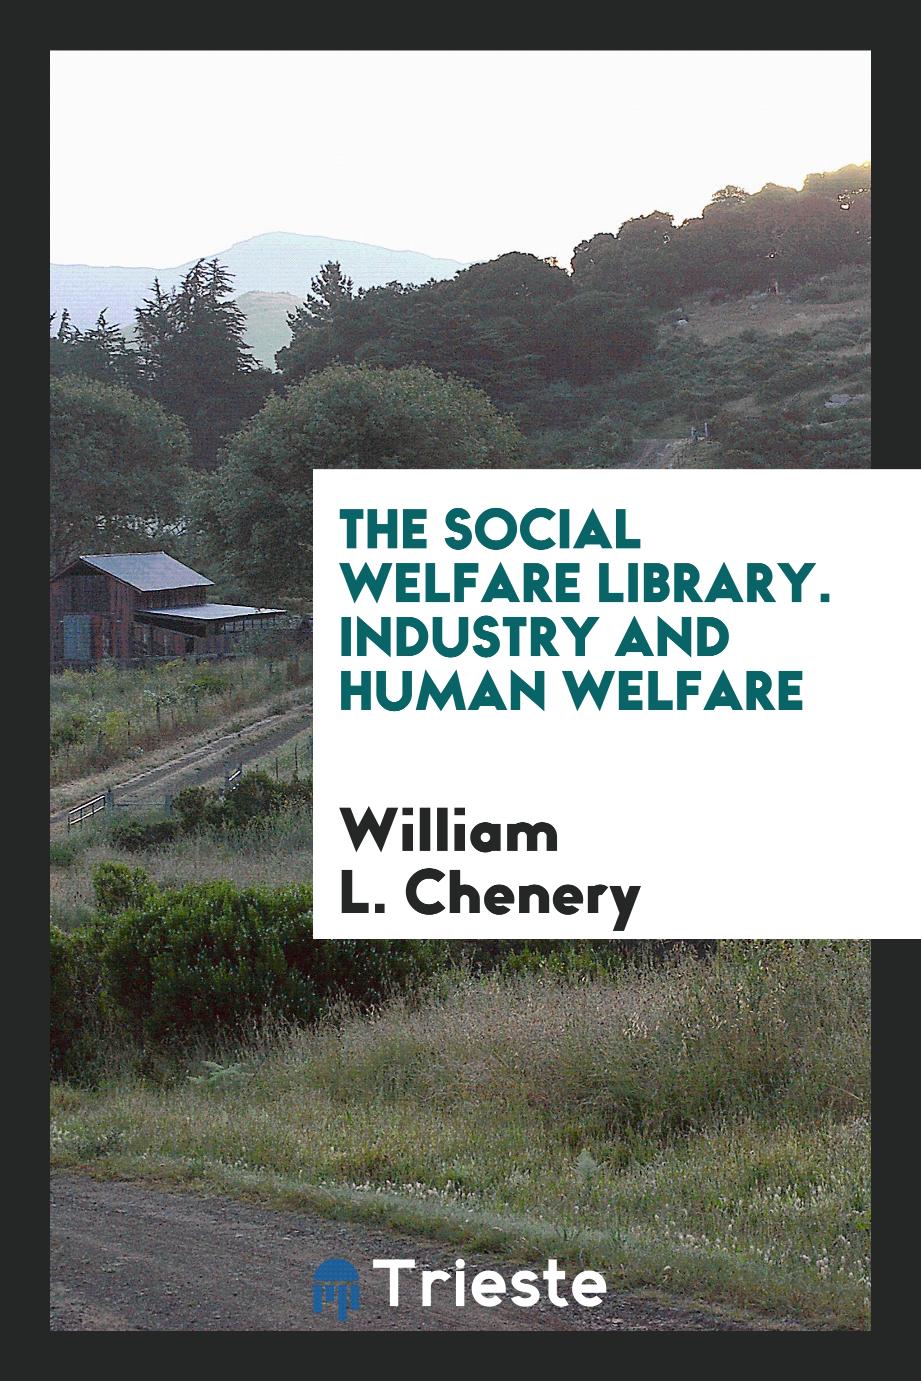 The Social Welfare Library. Industry and Human Welfare